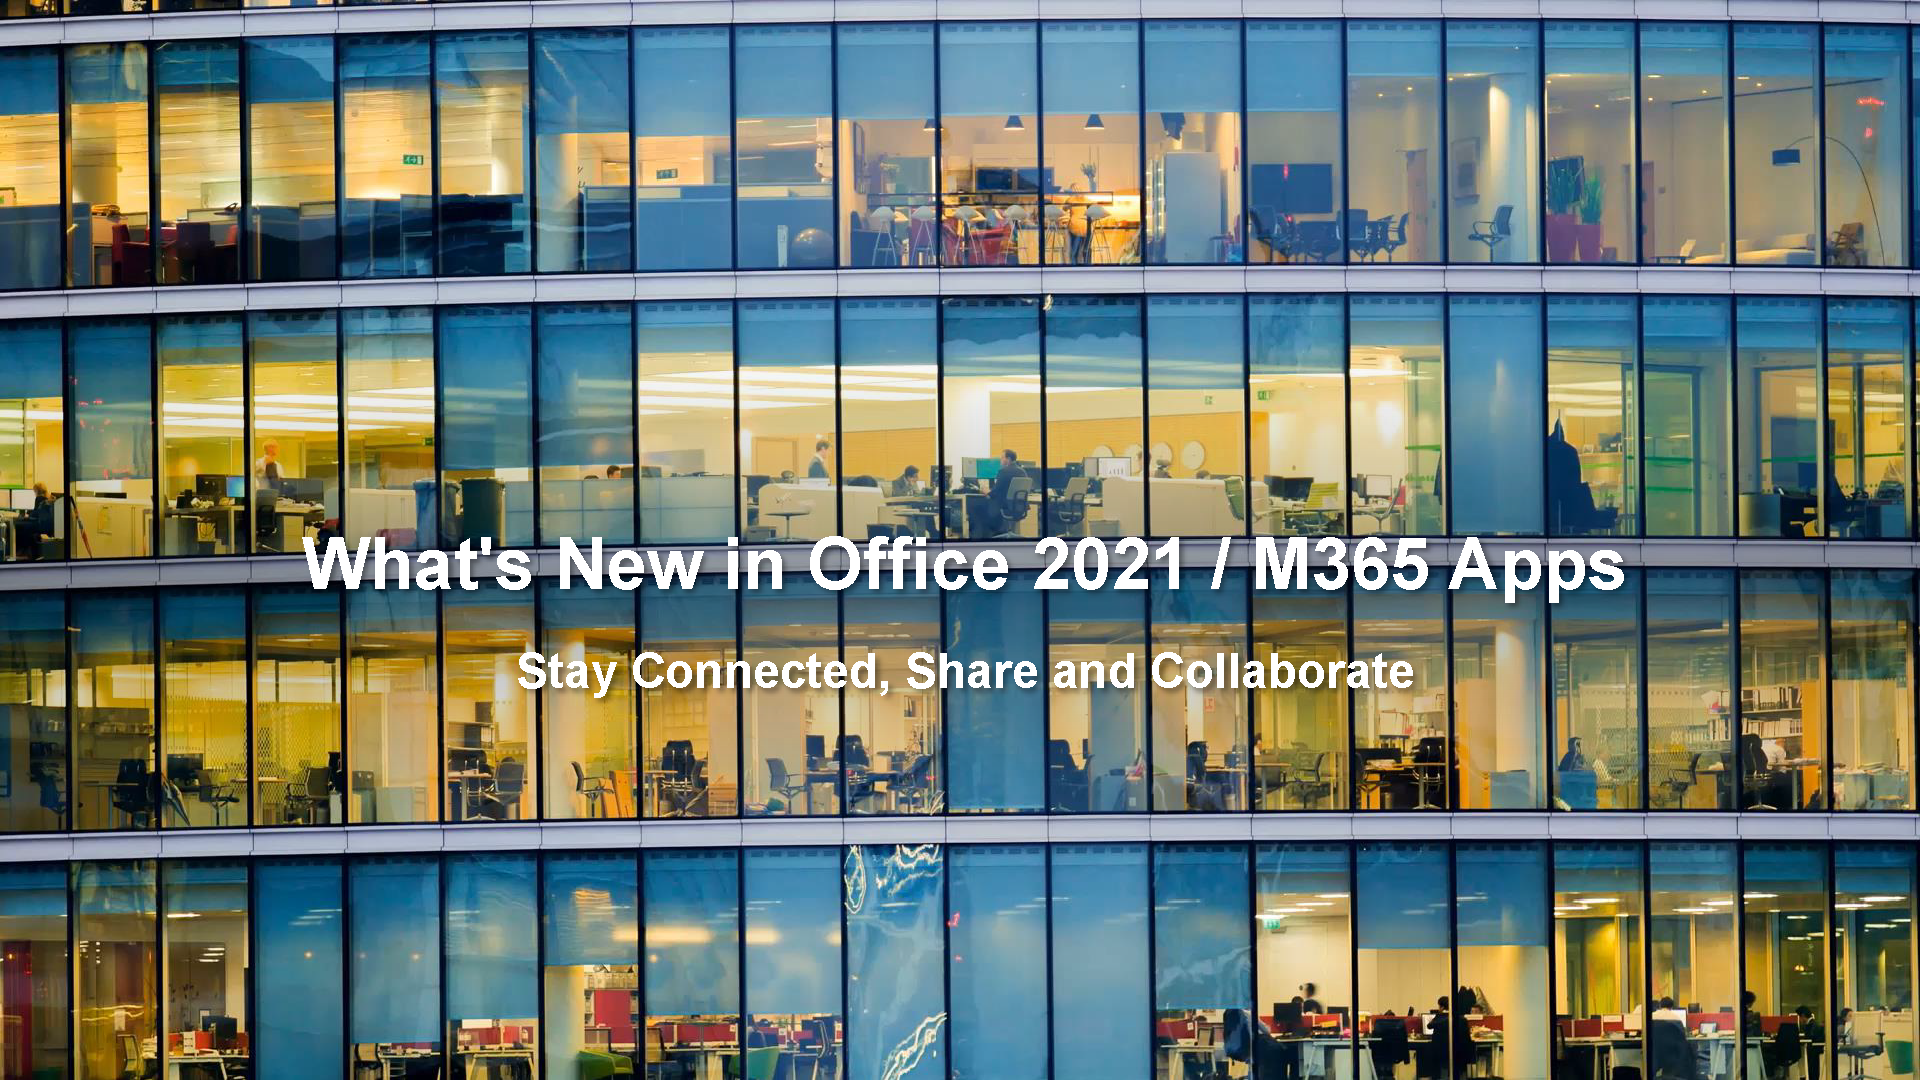 What’s New in Office 2021 / M365 Apps – Stay Connected, Share and Collaborate